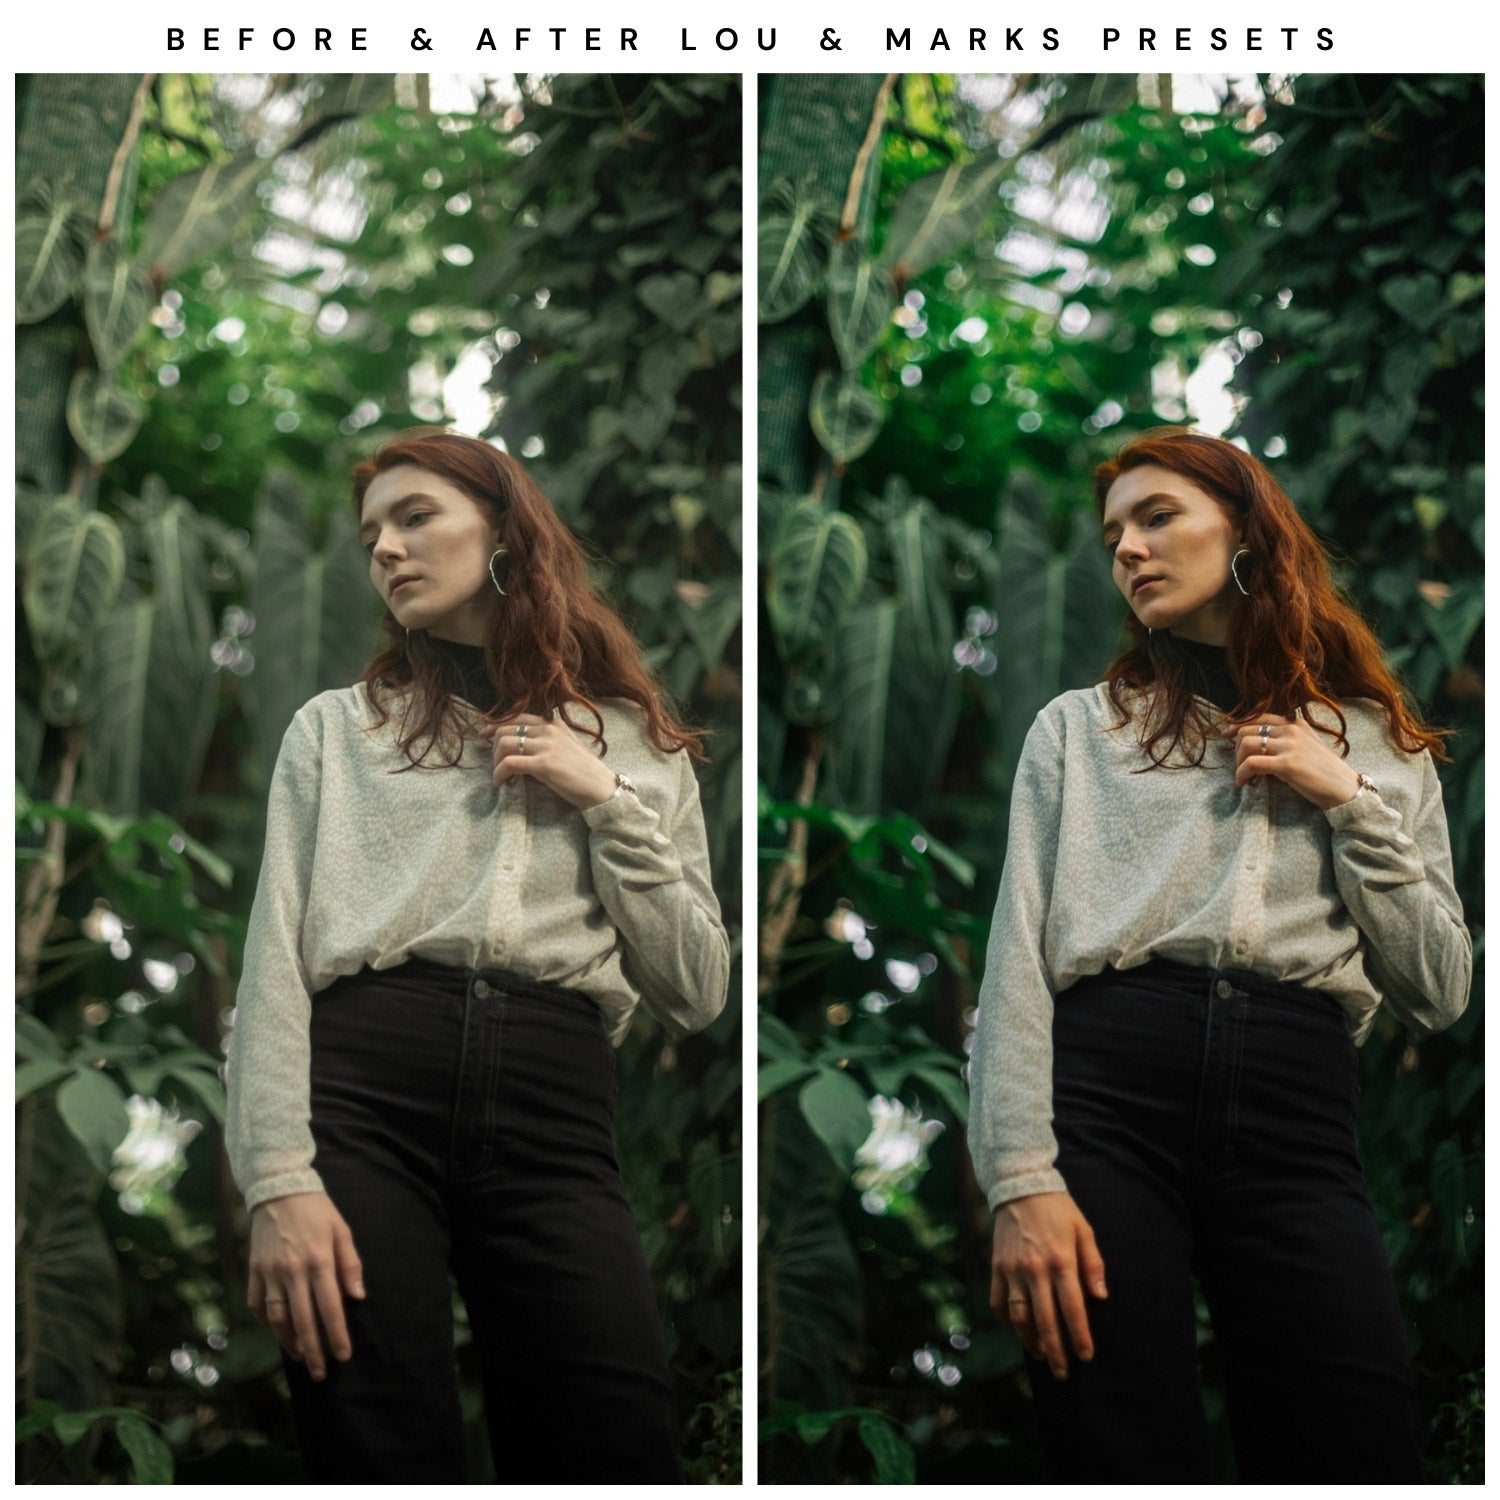 Lou And Marks Presets Moody Lightroom Presets Bundle The Best Moody Presets Blogger